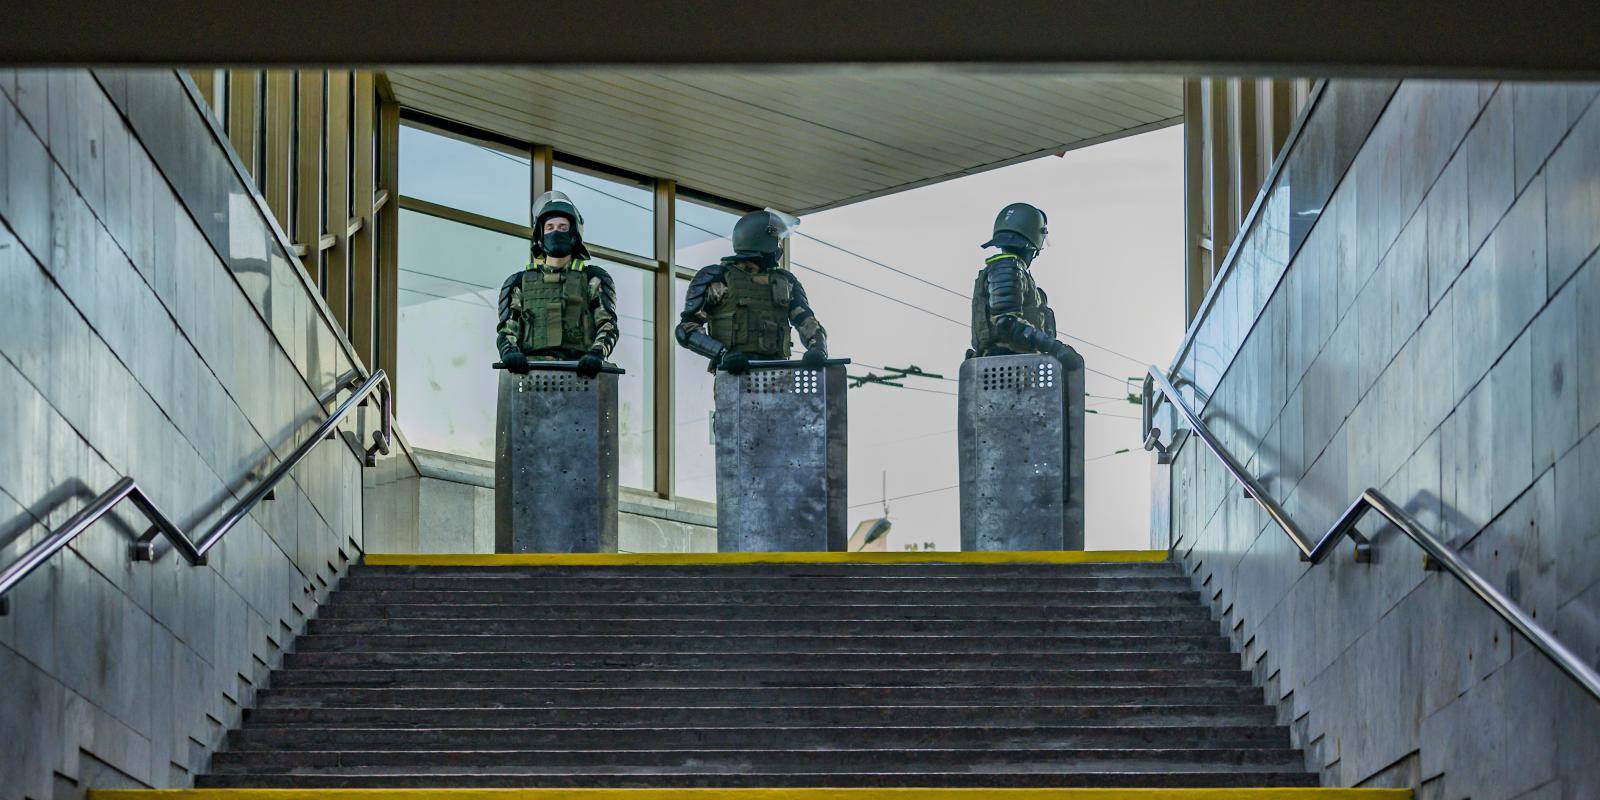 Three police officers with batons, shields and body armour stand at the top of a flight of steps